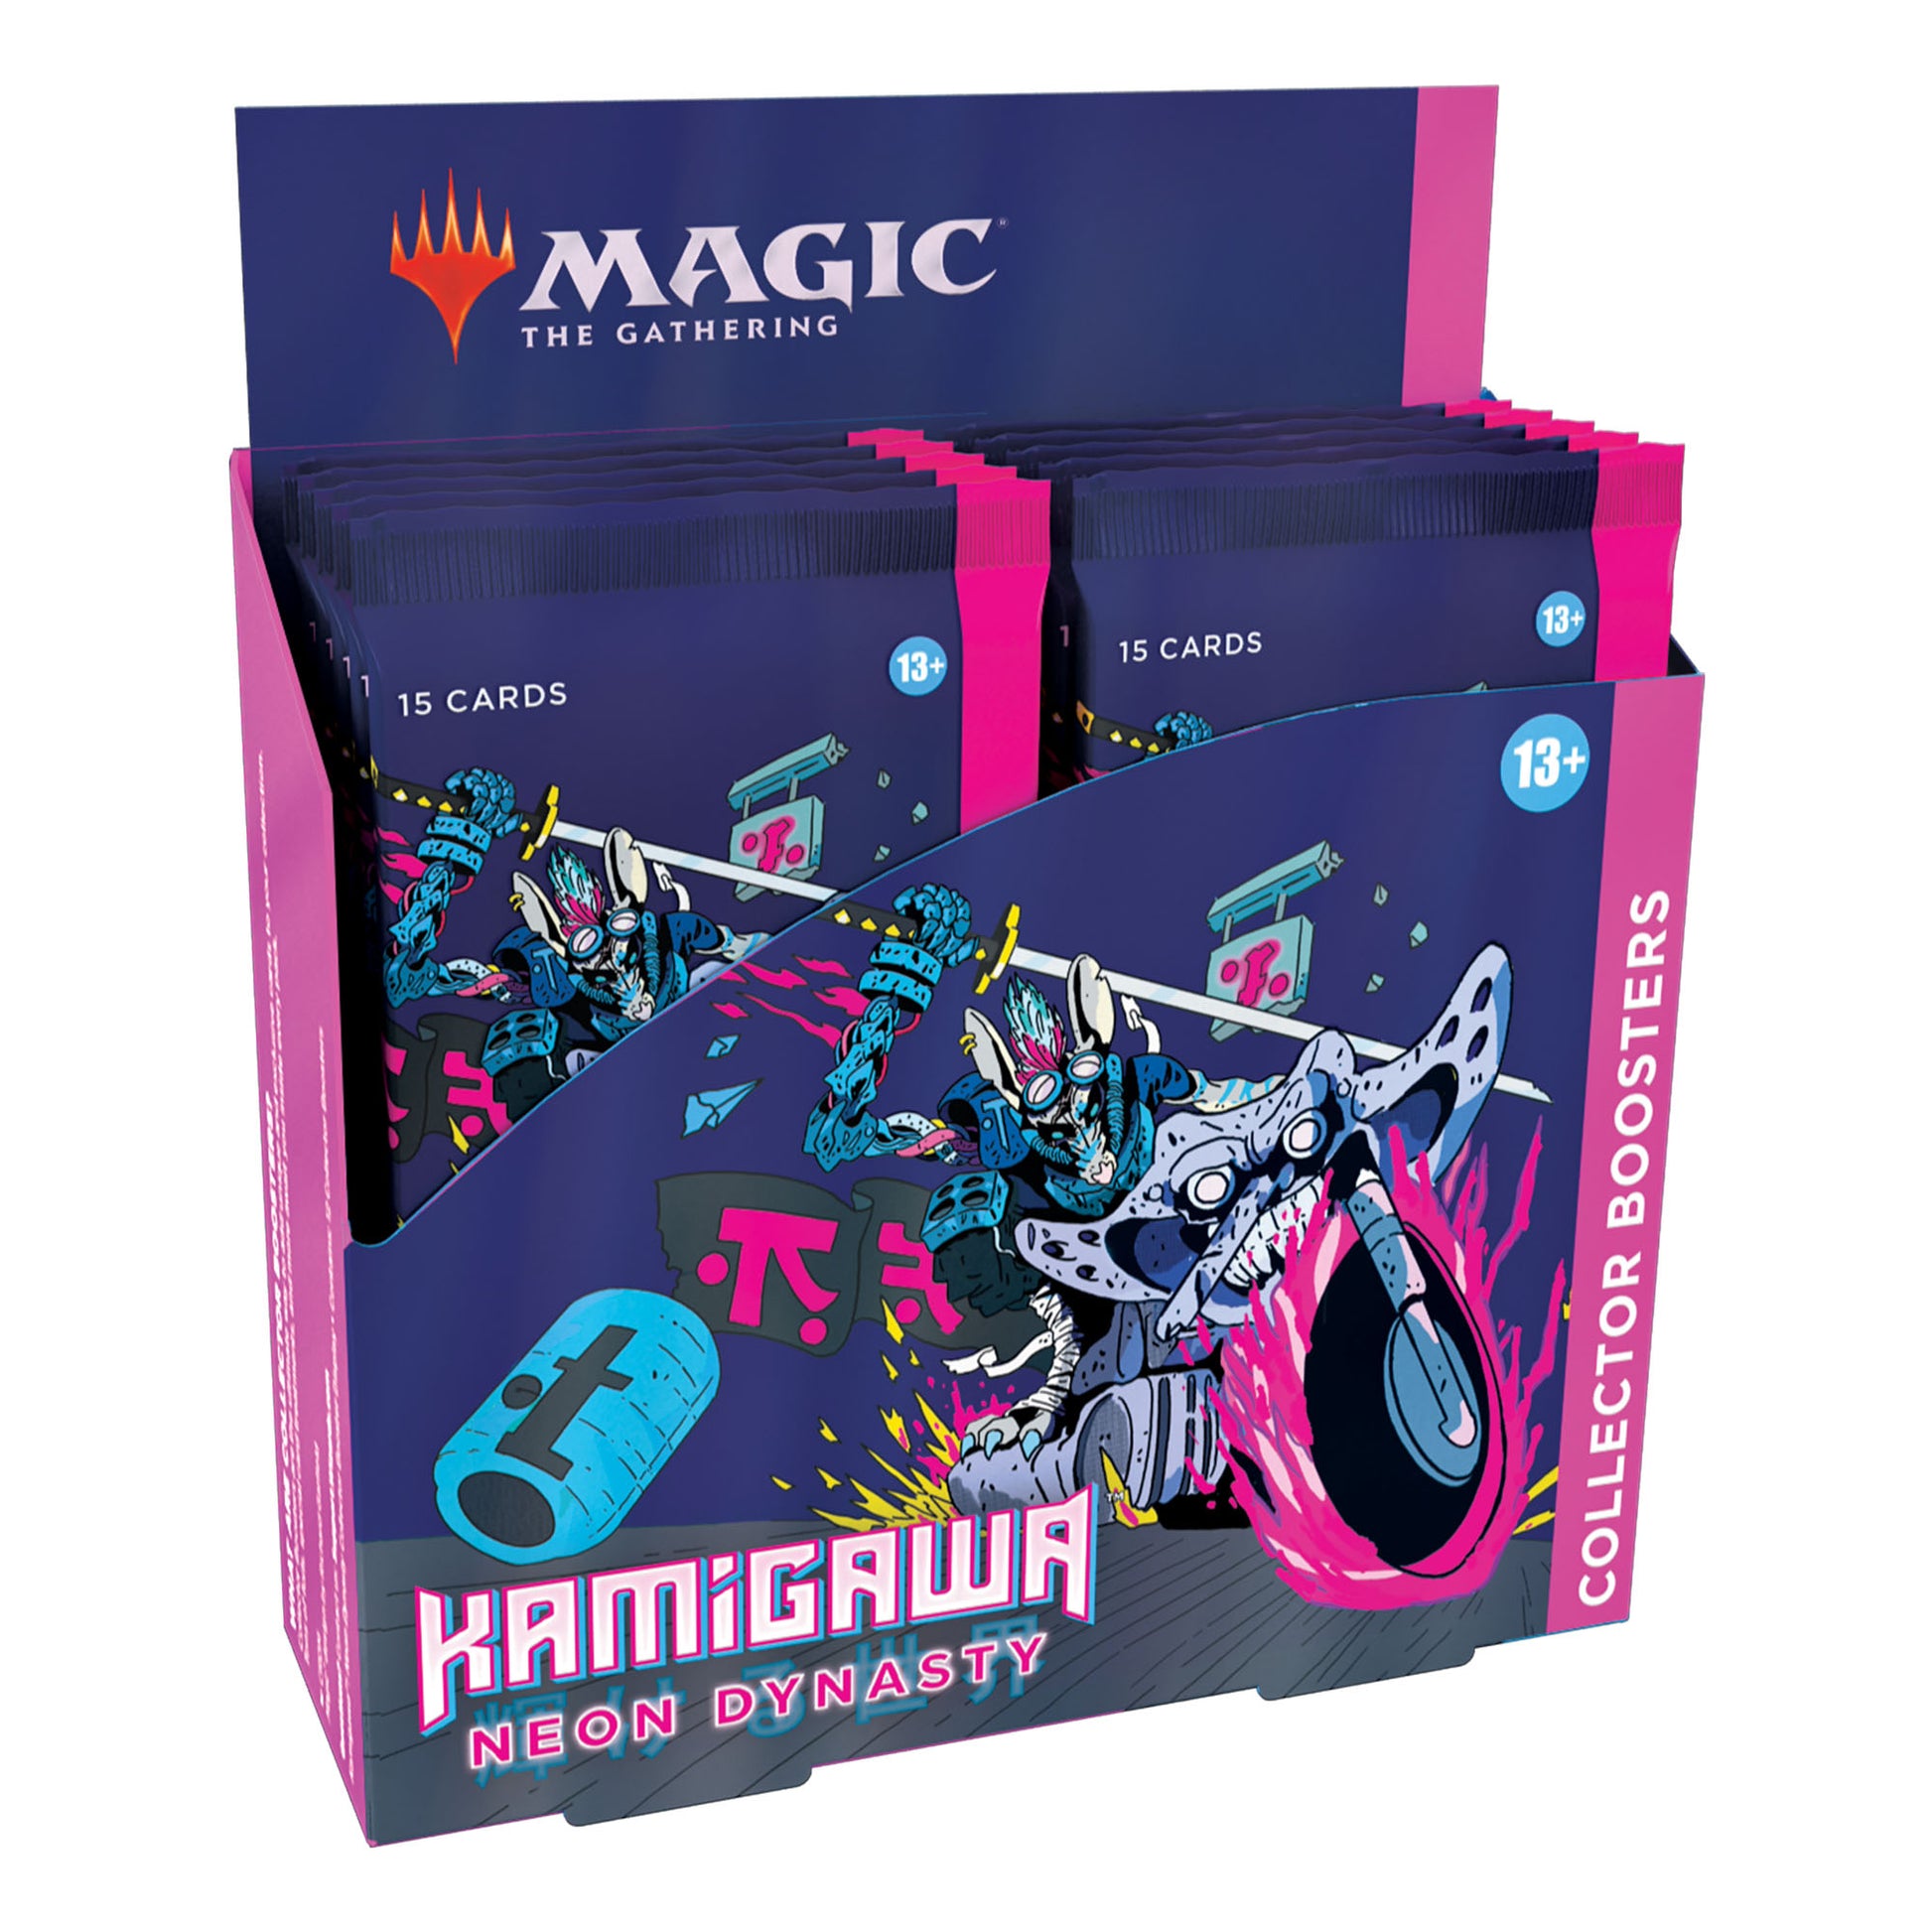 Magic The Gathering: Kamigawa Neon Dynasty Collector Booster Box, Wizards of the Coast, Magic the Gathering Sealed, preorder-magic-the-gathering-kamigawa-neon-dynasty-collector-booster-box, Kamigawa: Neon Dynasty, Magic the Gathering, TCG, Dark Ninja Gaming LA